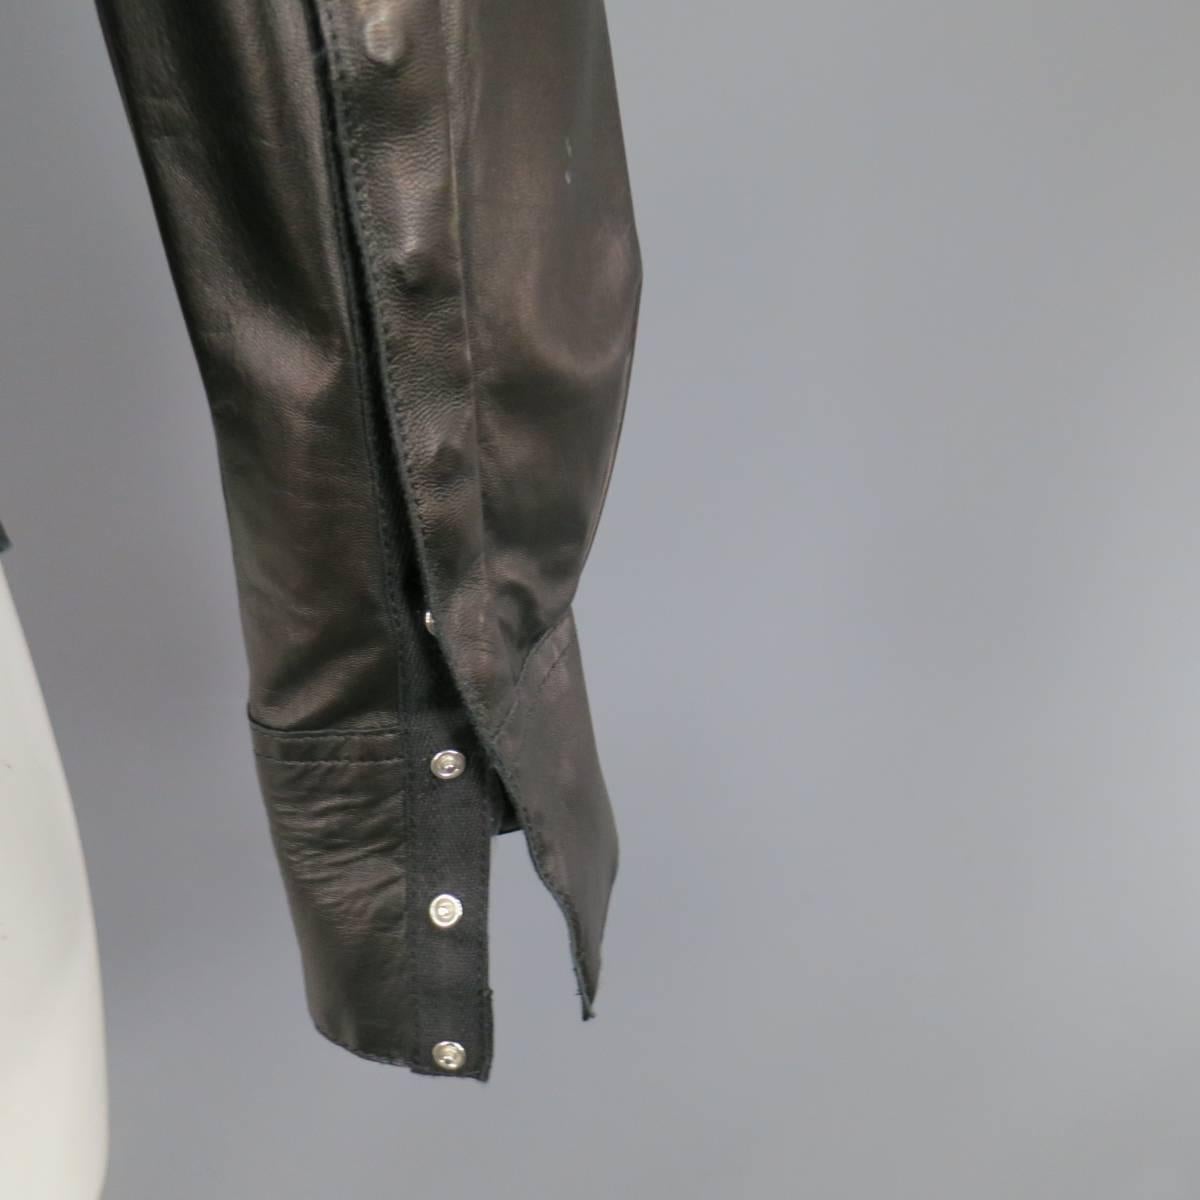 This CoSUME NATIONAL HOMME shirt comes in smooth, soft black leather with a pointed collar, and hidden placket with snap closures. Fading throughout leather from wear can be touched up by a leather professional. Made in Italy.
 
Good Pre-Owned